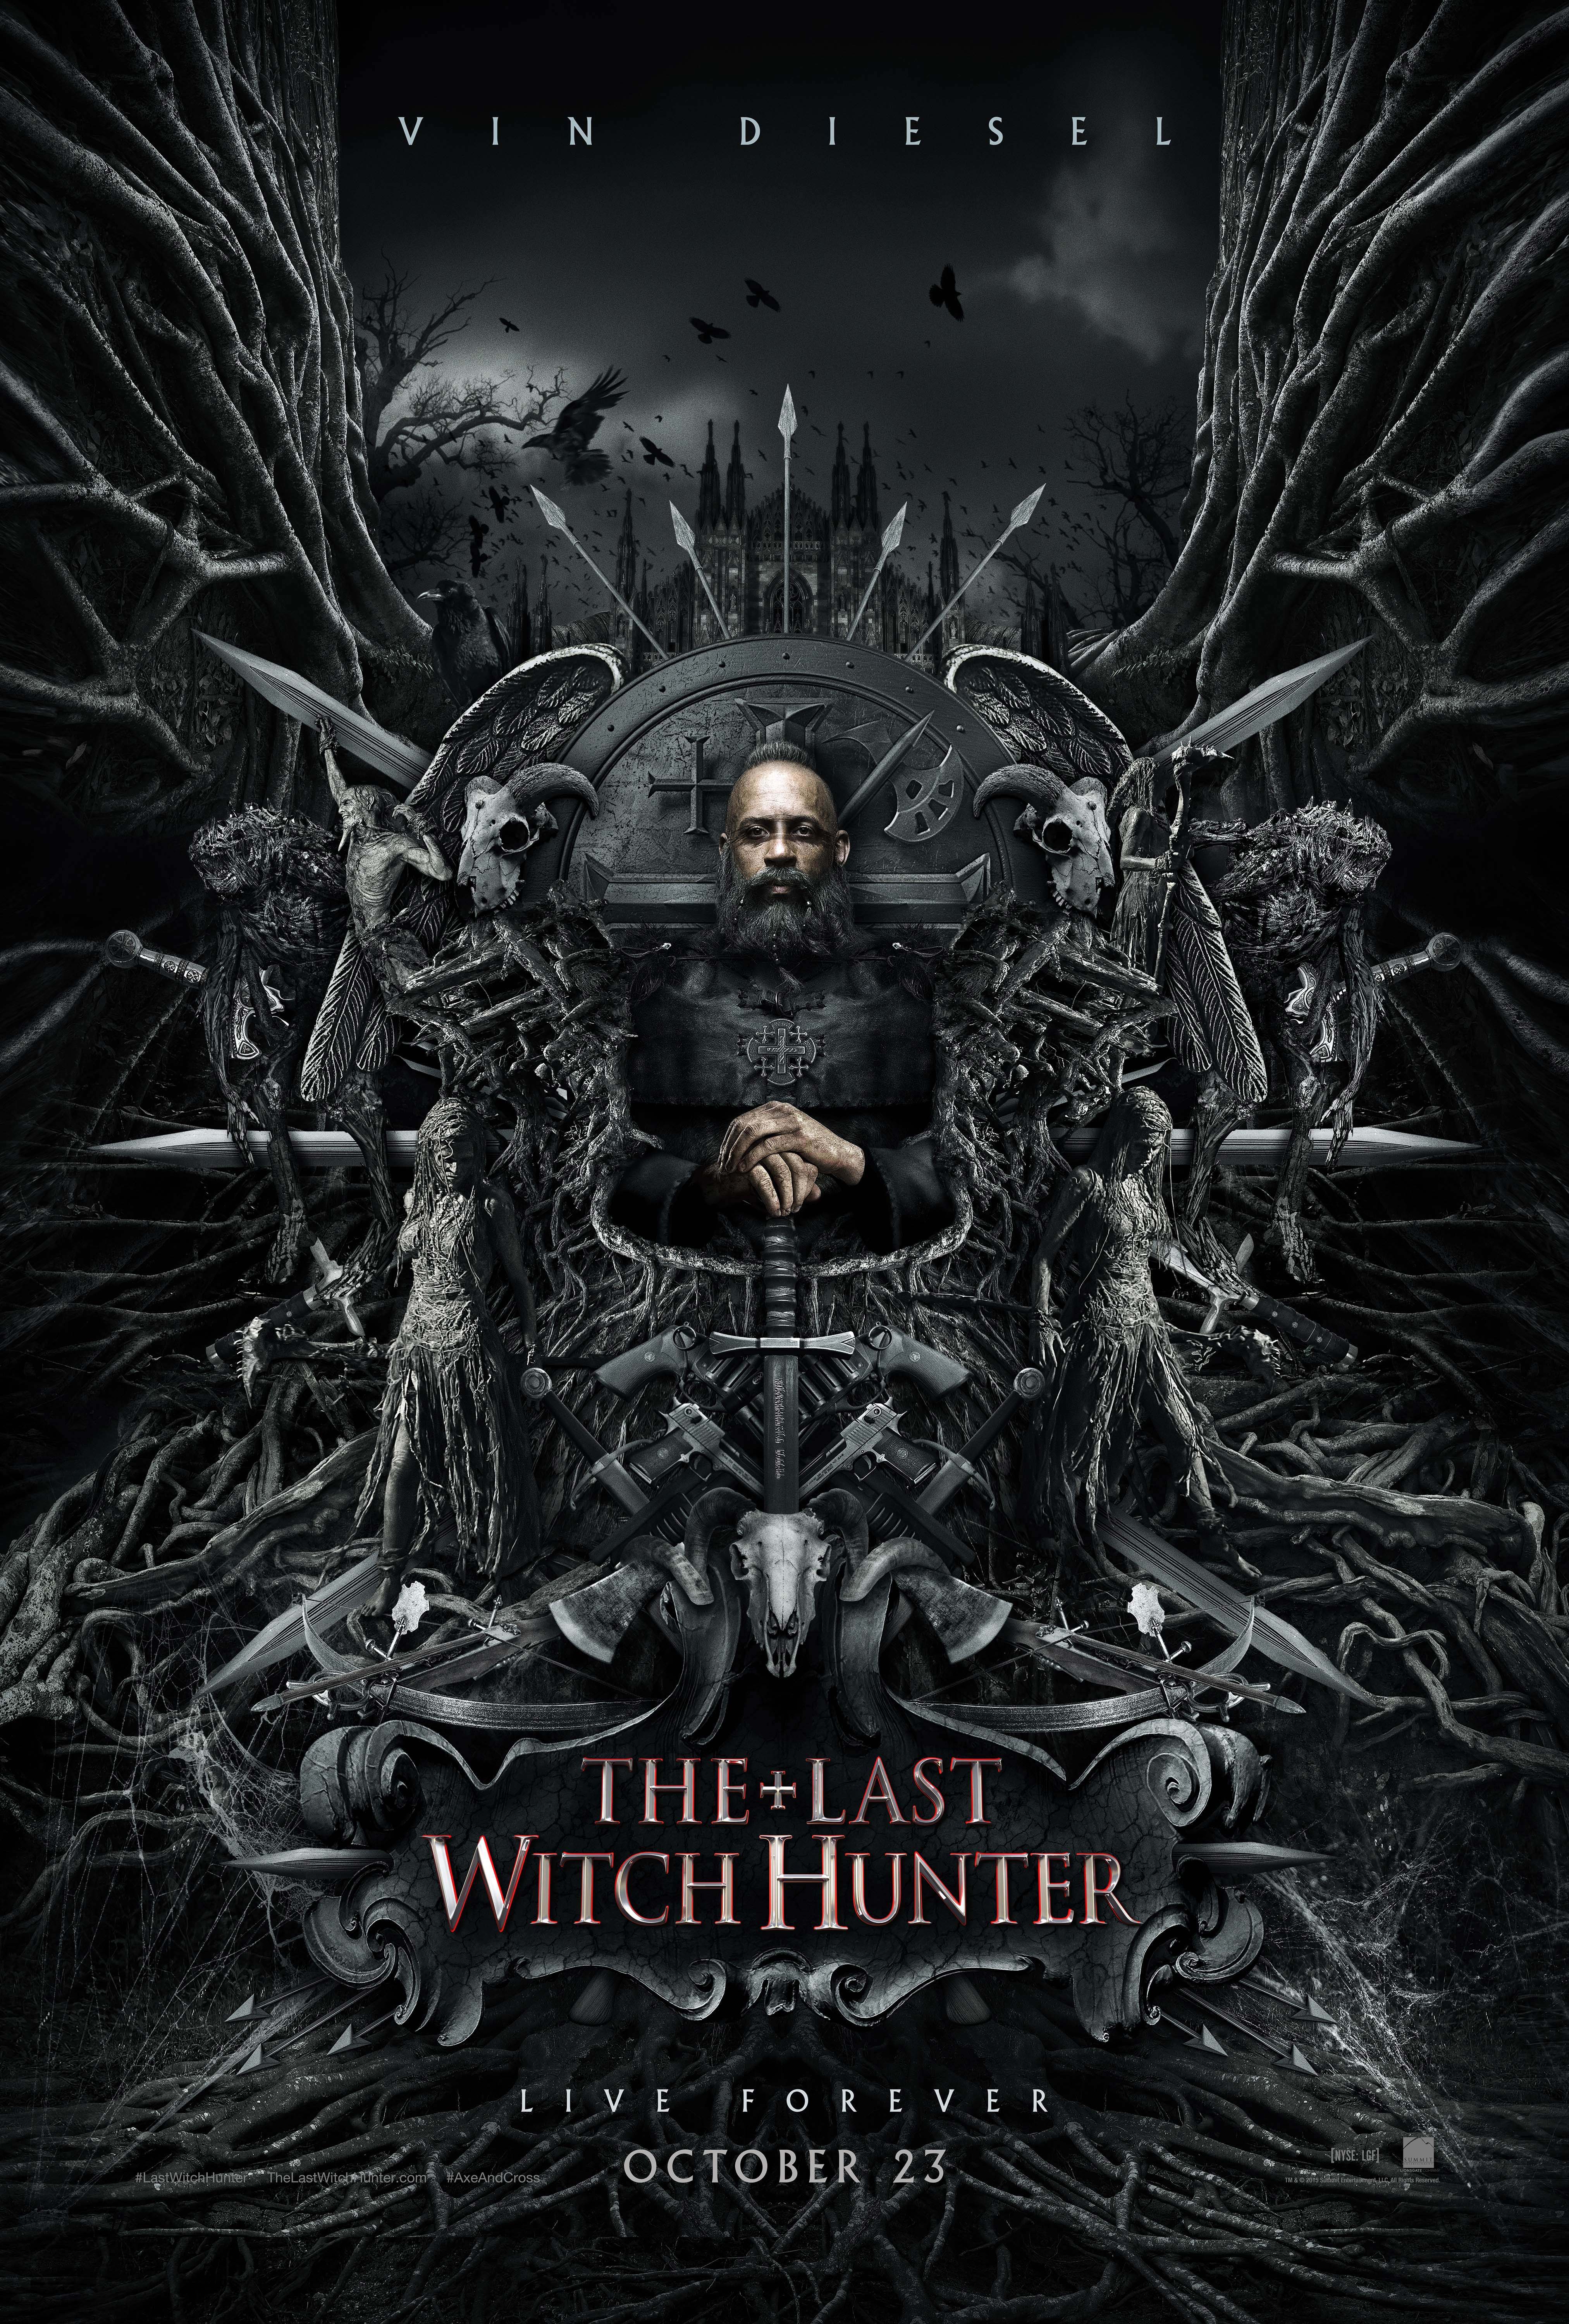 The Last Witch Hunter #5